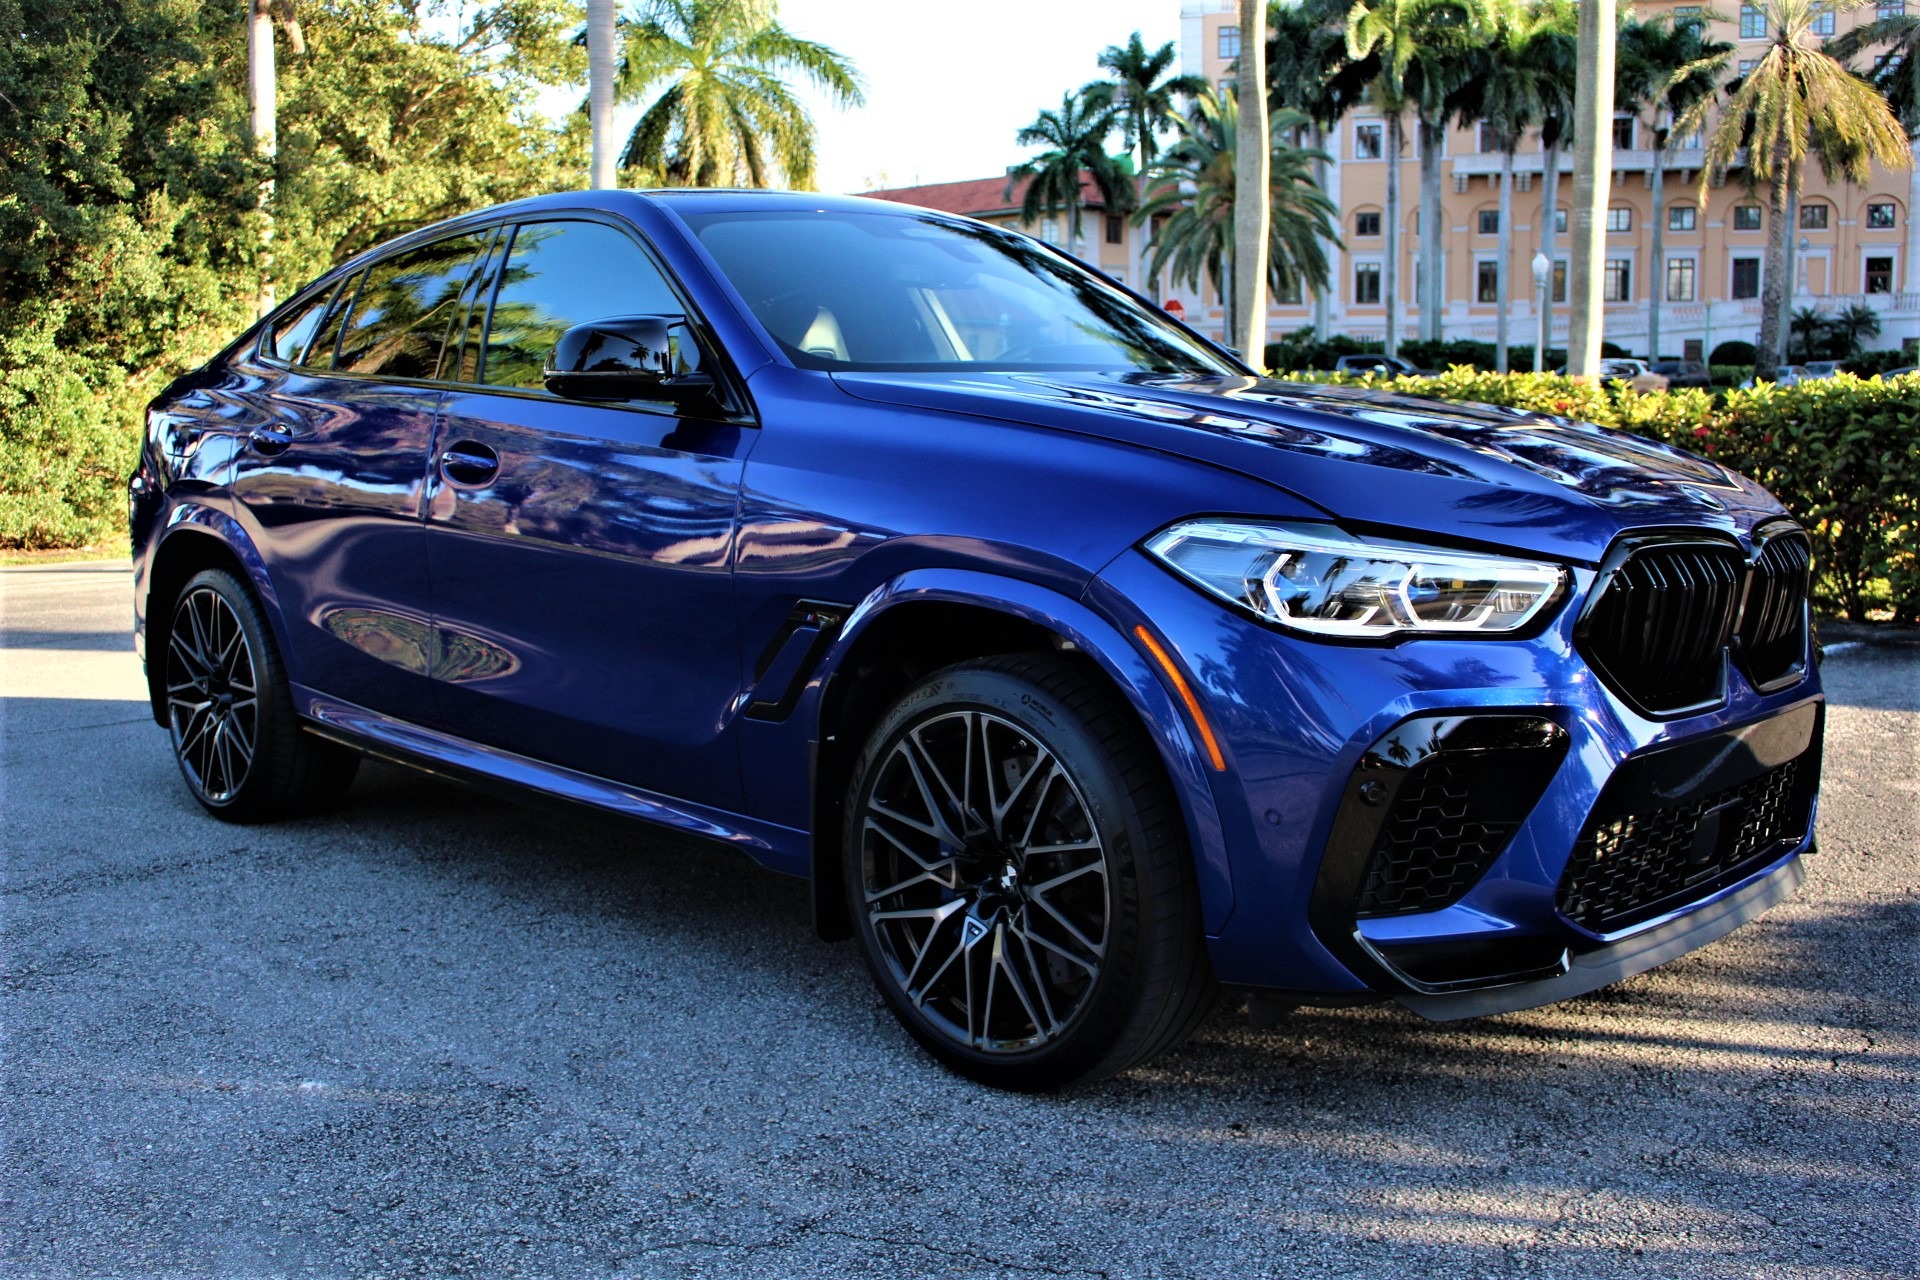 Used 2020 BMW X6 M Competition for sale $122,850 at The Gables Sports Cars in Miami FL 33146 1